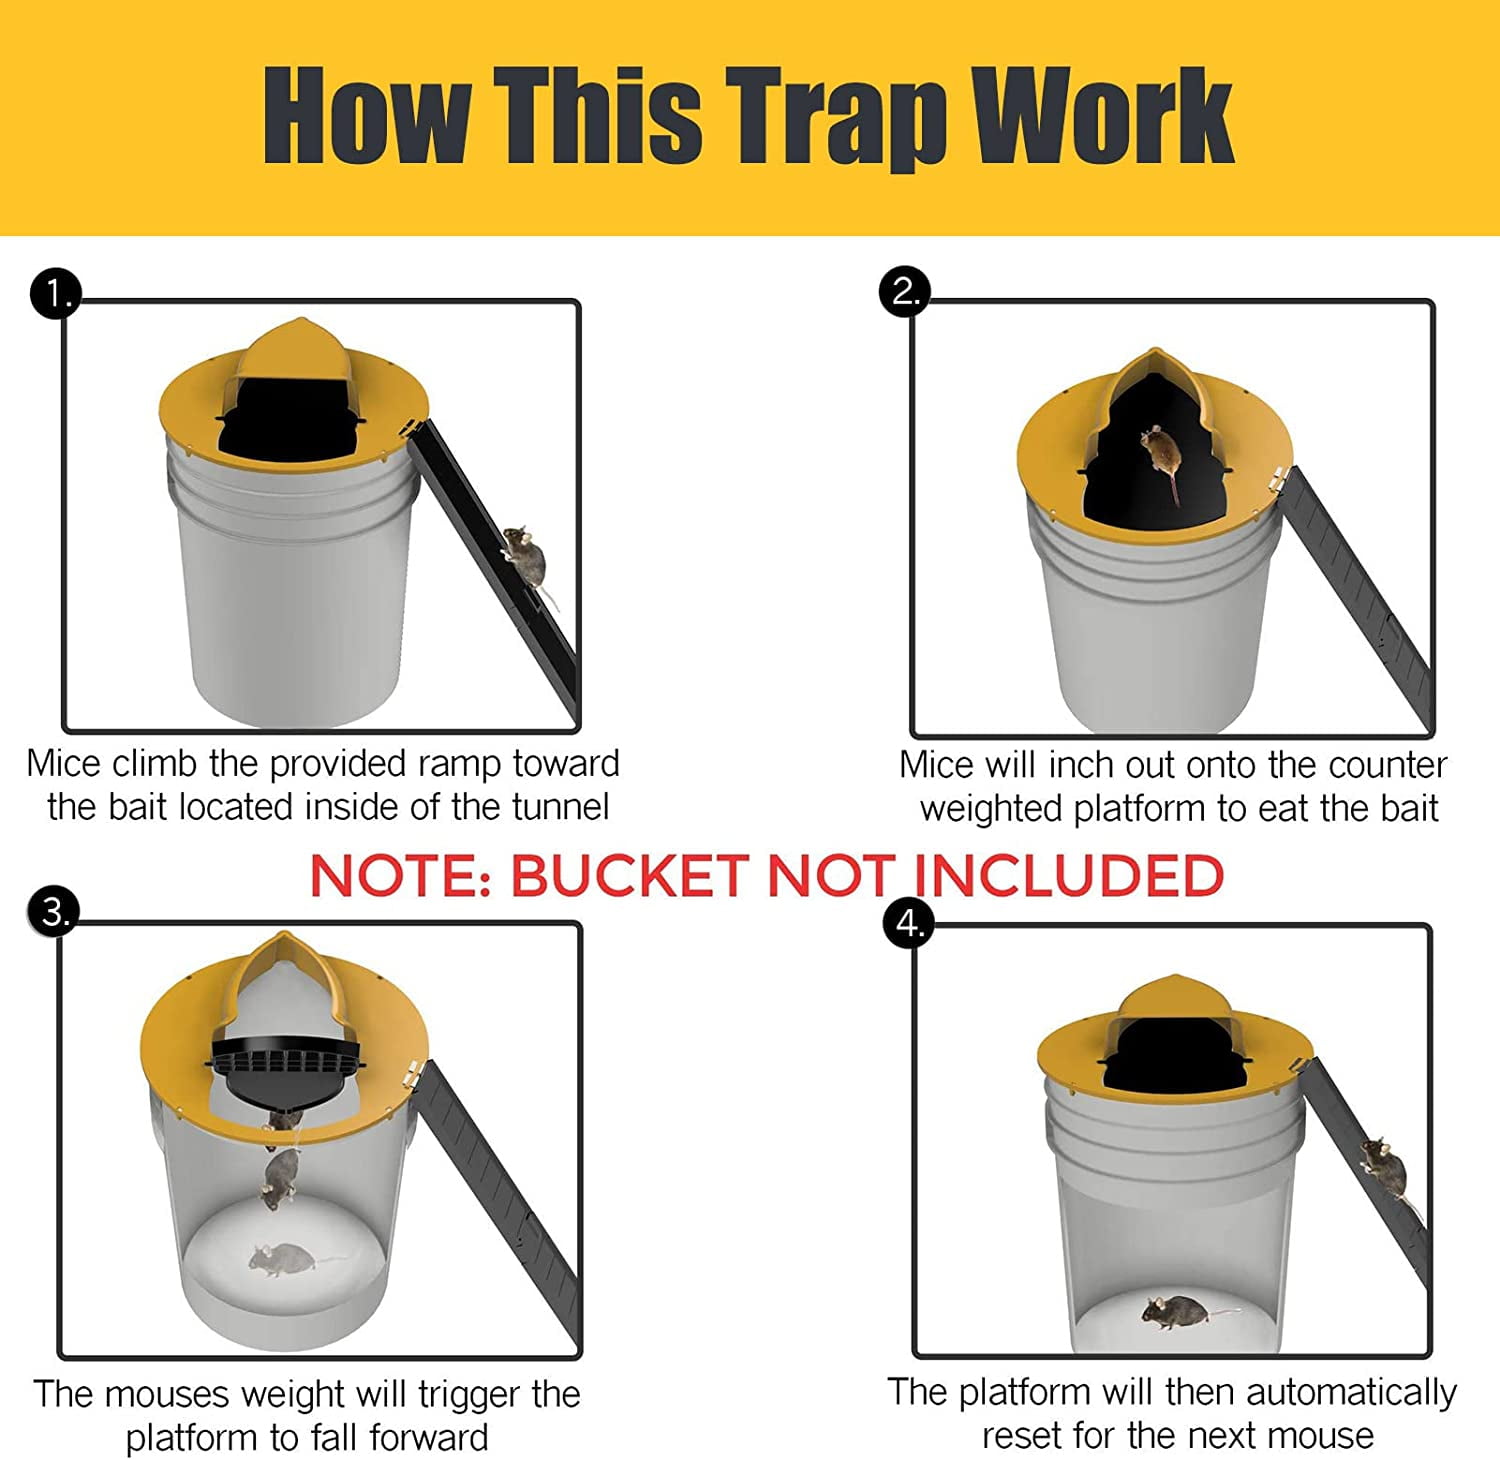 MAIGU Mouse Trap, Rat Trap Bucket Spinner, Mice Rats Mouse Killer Roll Trap  Log Grasp Bucket Rolling Roller+Ramp, Sanitary Safe Mousetrap Catcher for